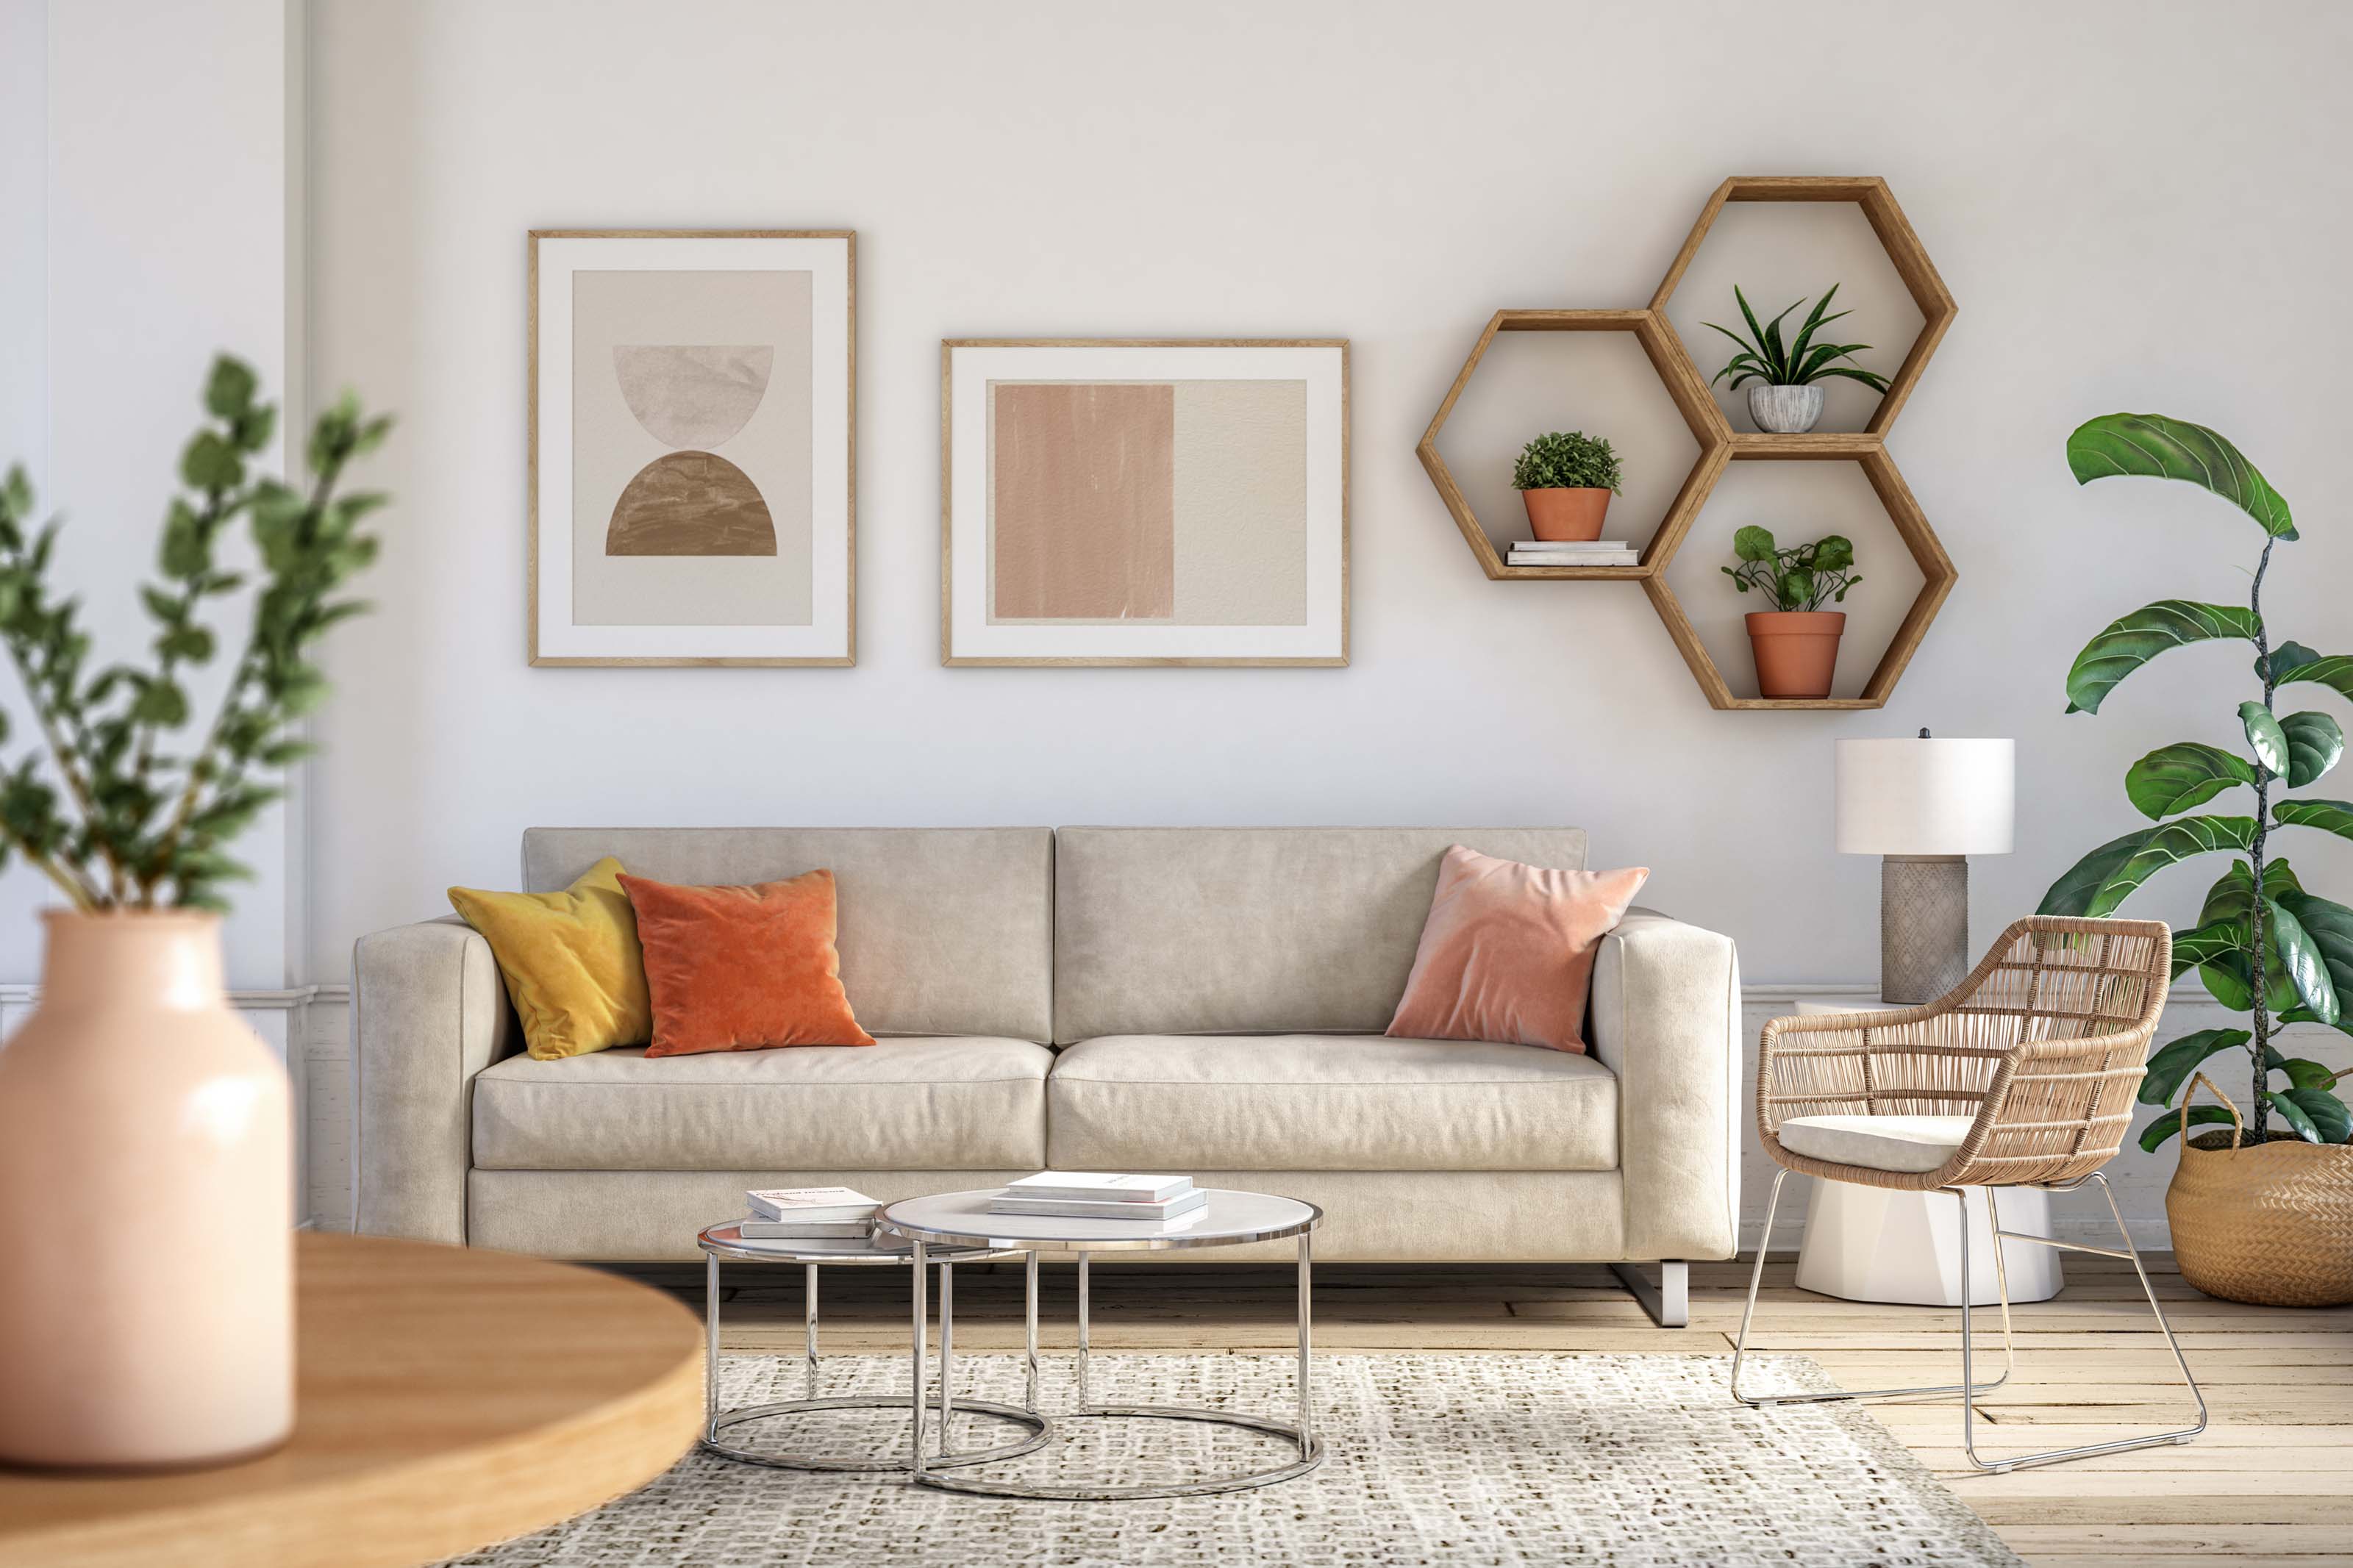 81 Home Staging Tips That Help Buyers Fall in Love